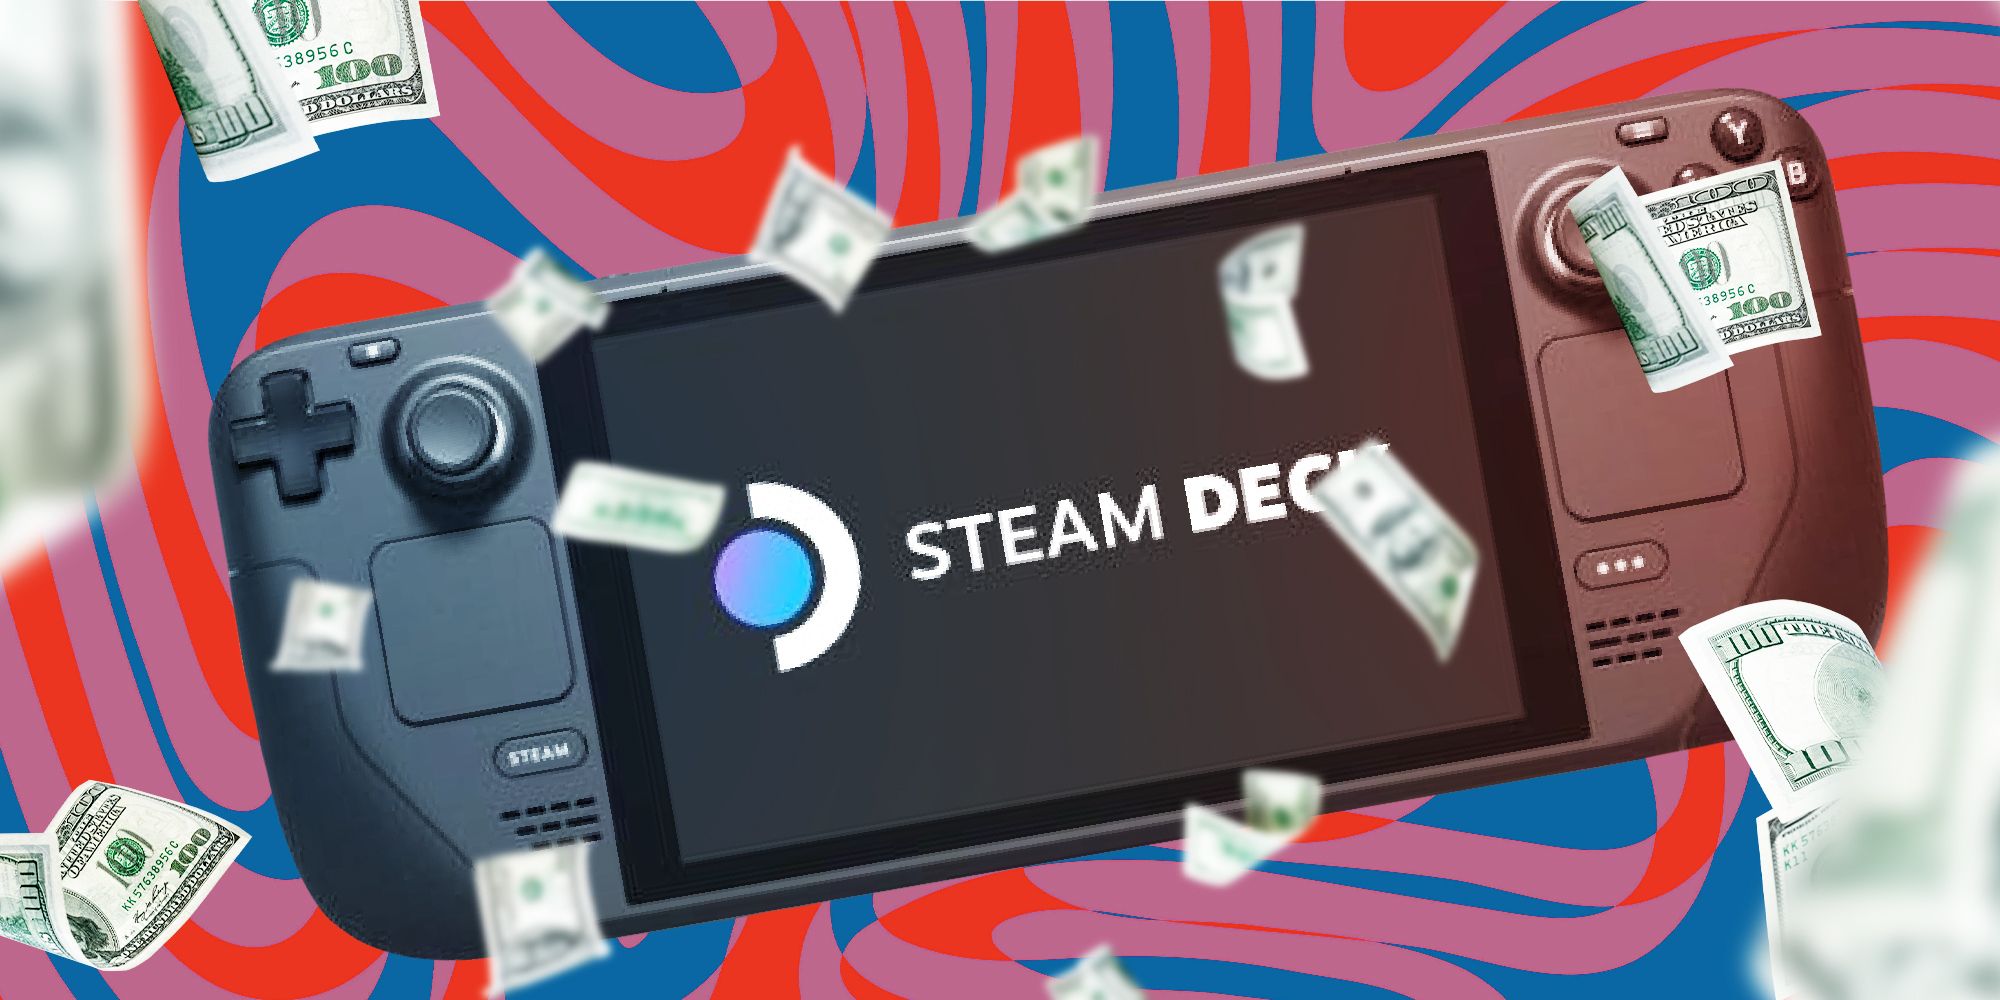 The Steam Deck OLED on a squiggly red, blue and purple background, with dollar bills raining down around it